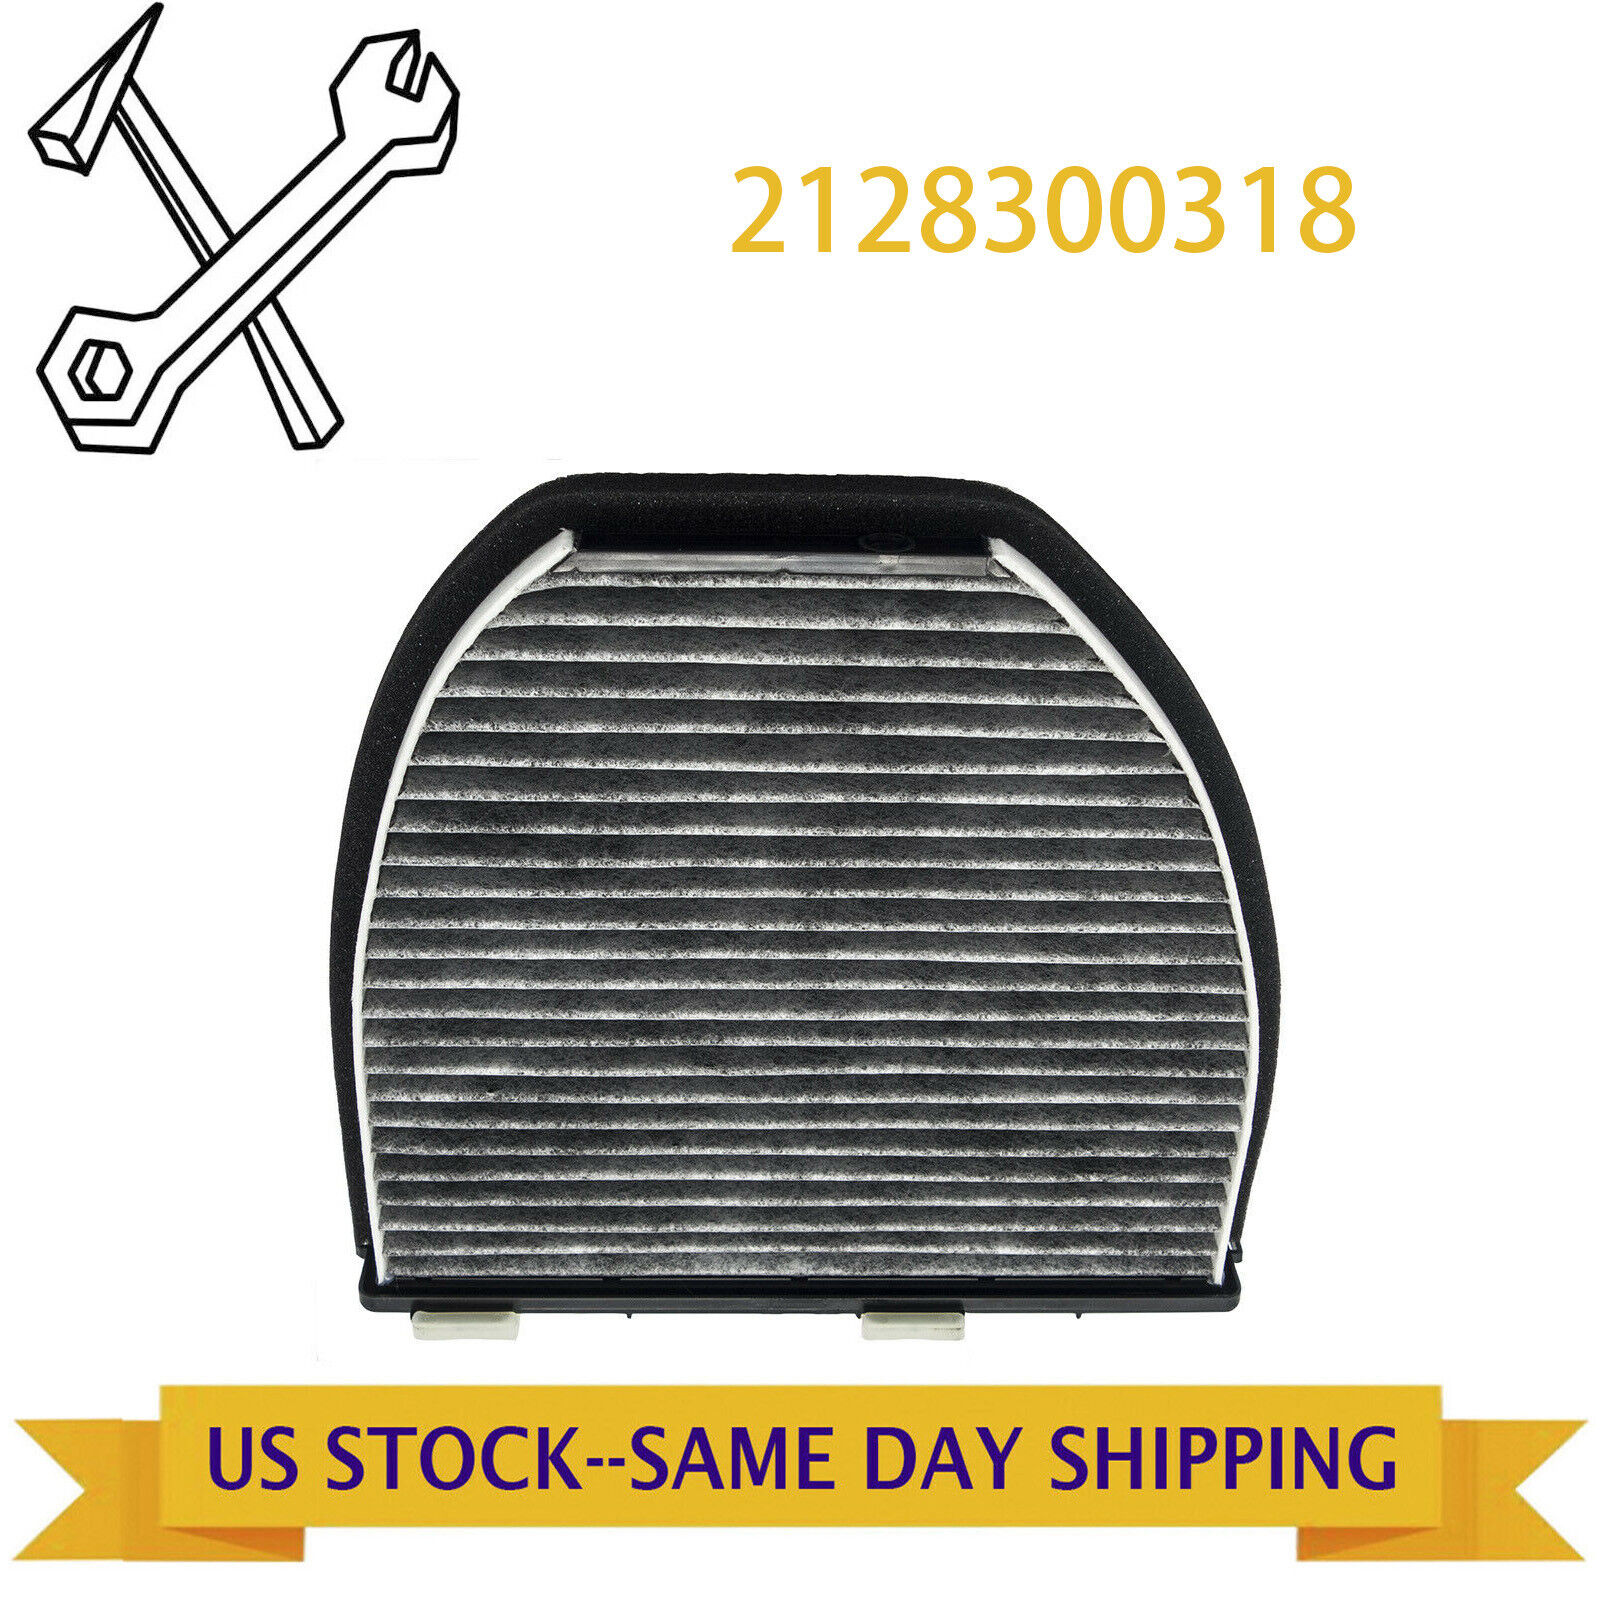 CABIN AIR FILTER FOR MERCEDES-BENZ C400 CLS500 CLS550 CLS63 AMG S CLS63 US Stock